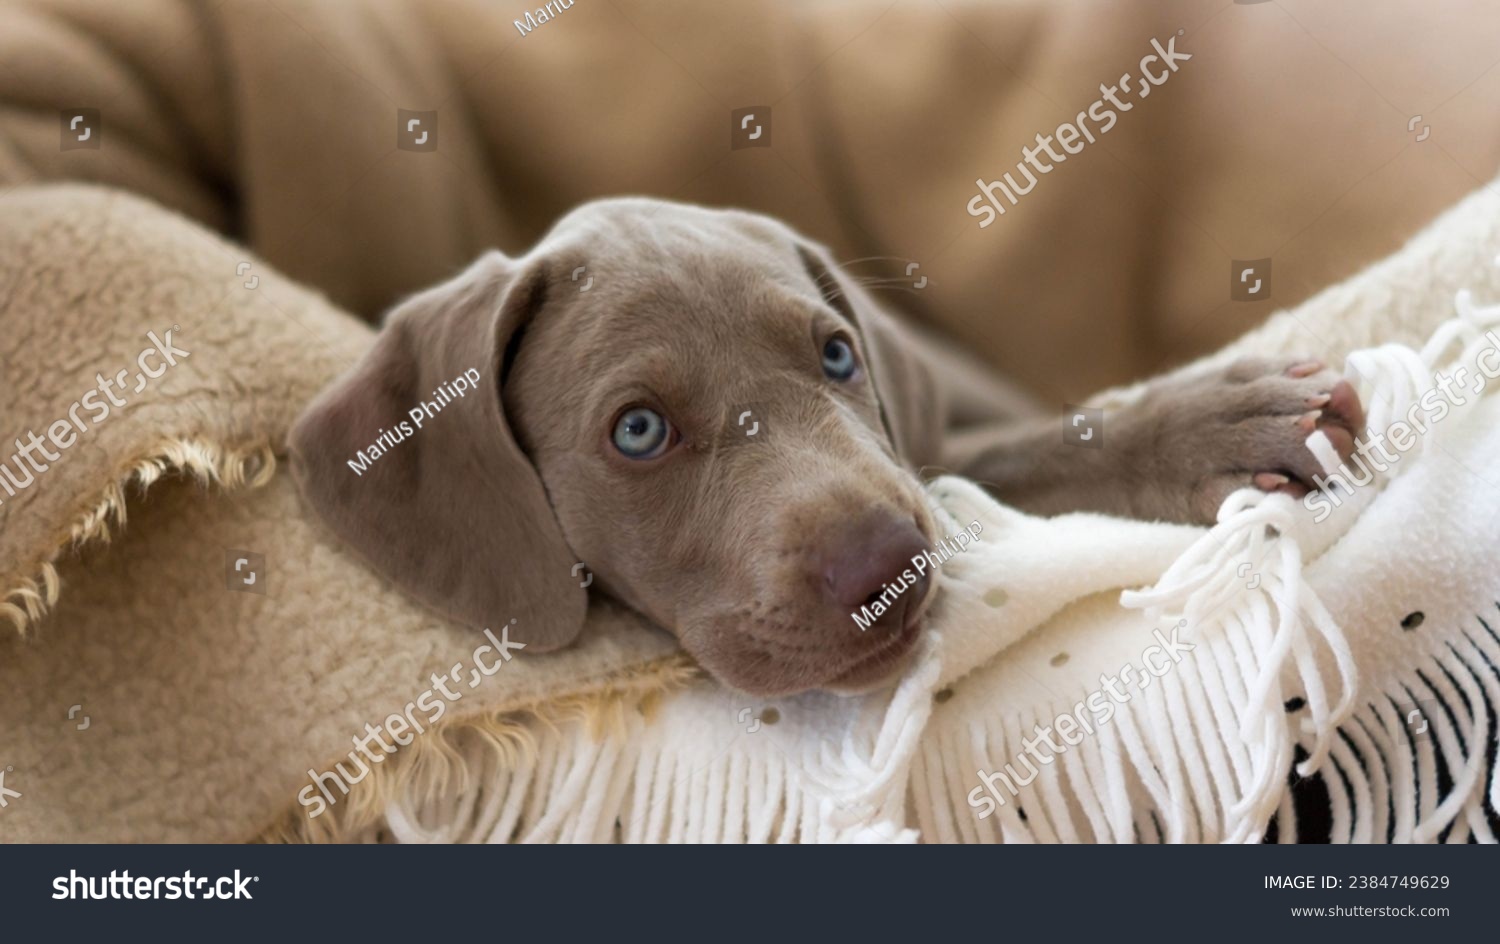 Weimaraner Hunting Dog puppy looking straigt at the camera #2384749629